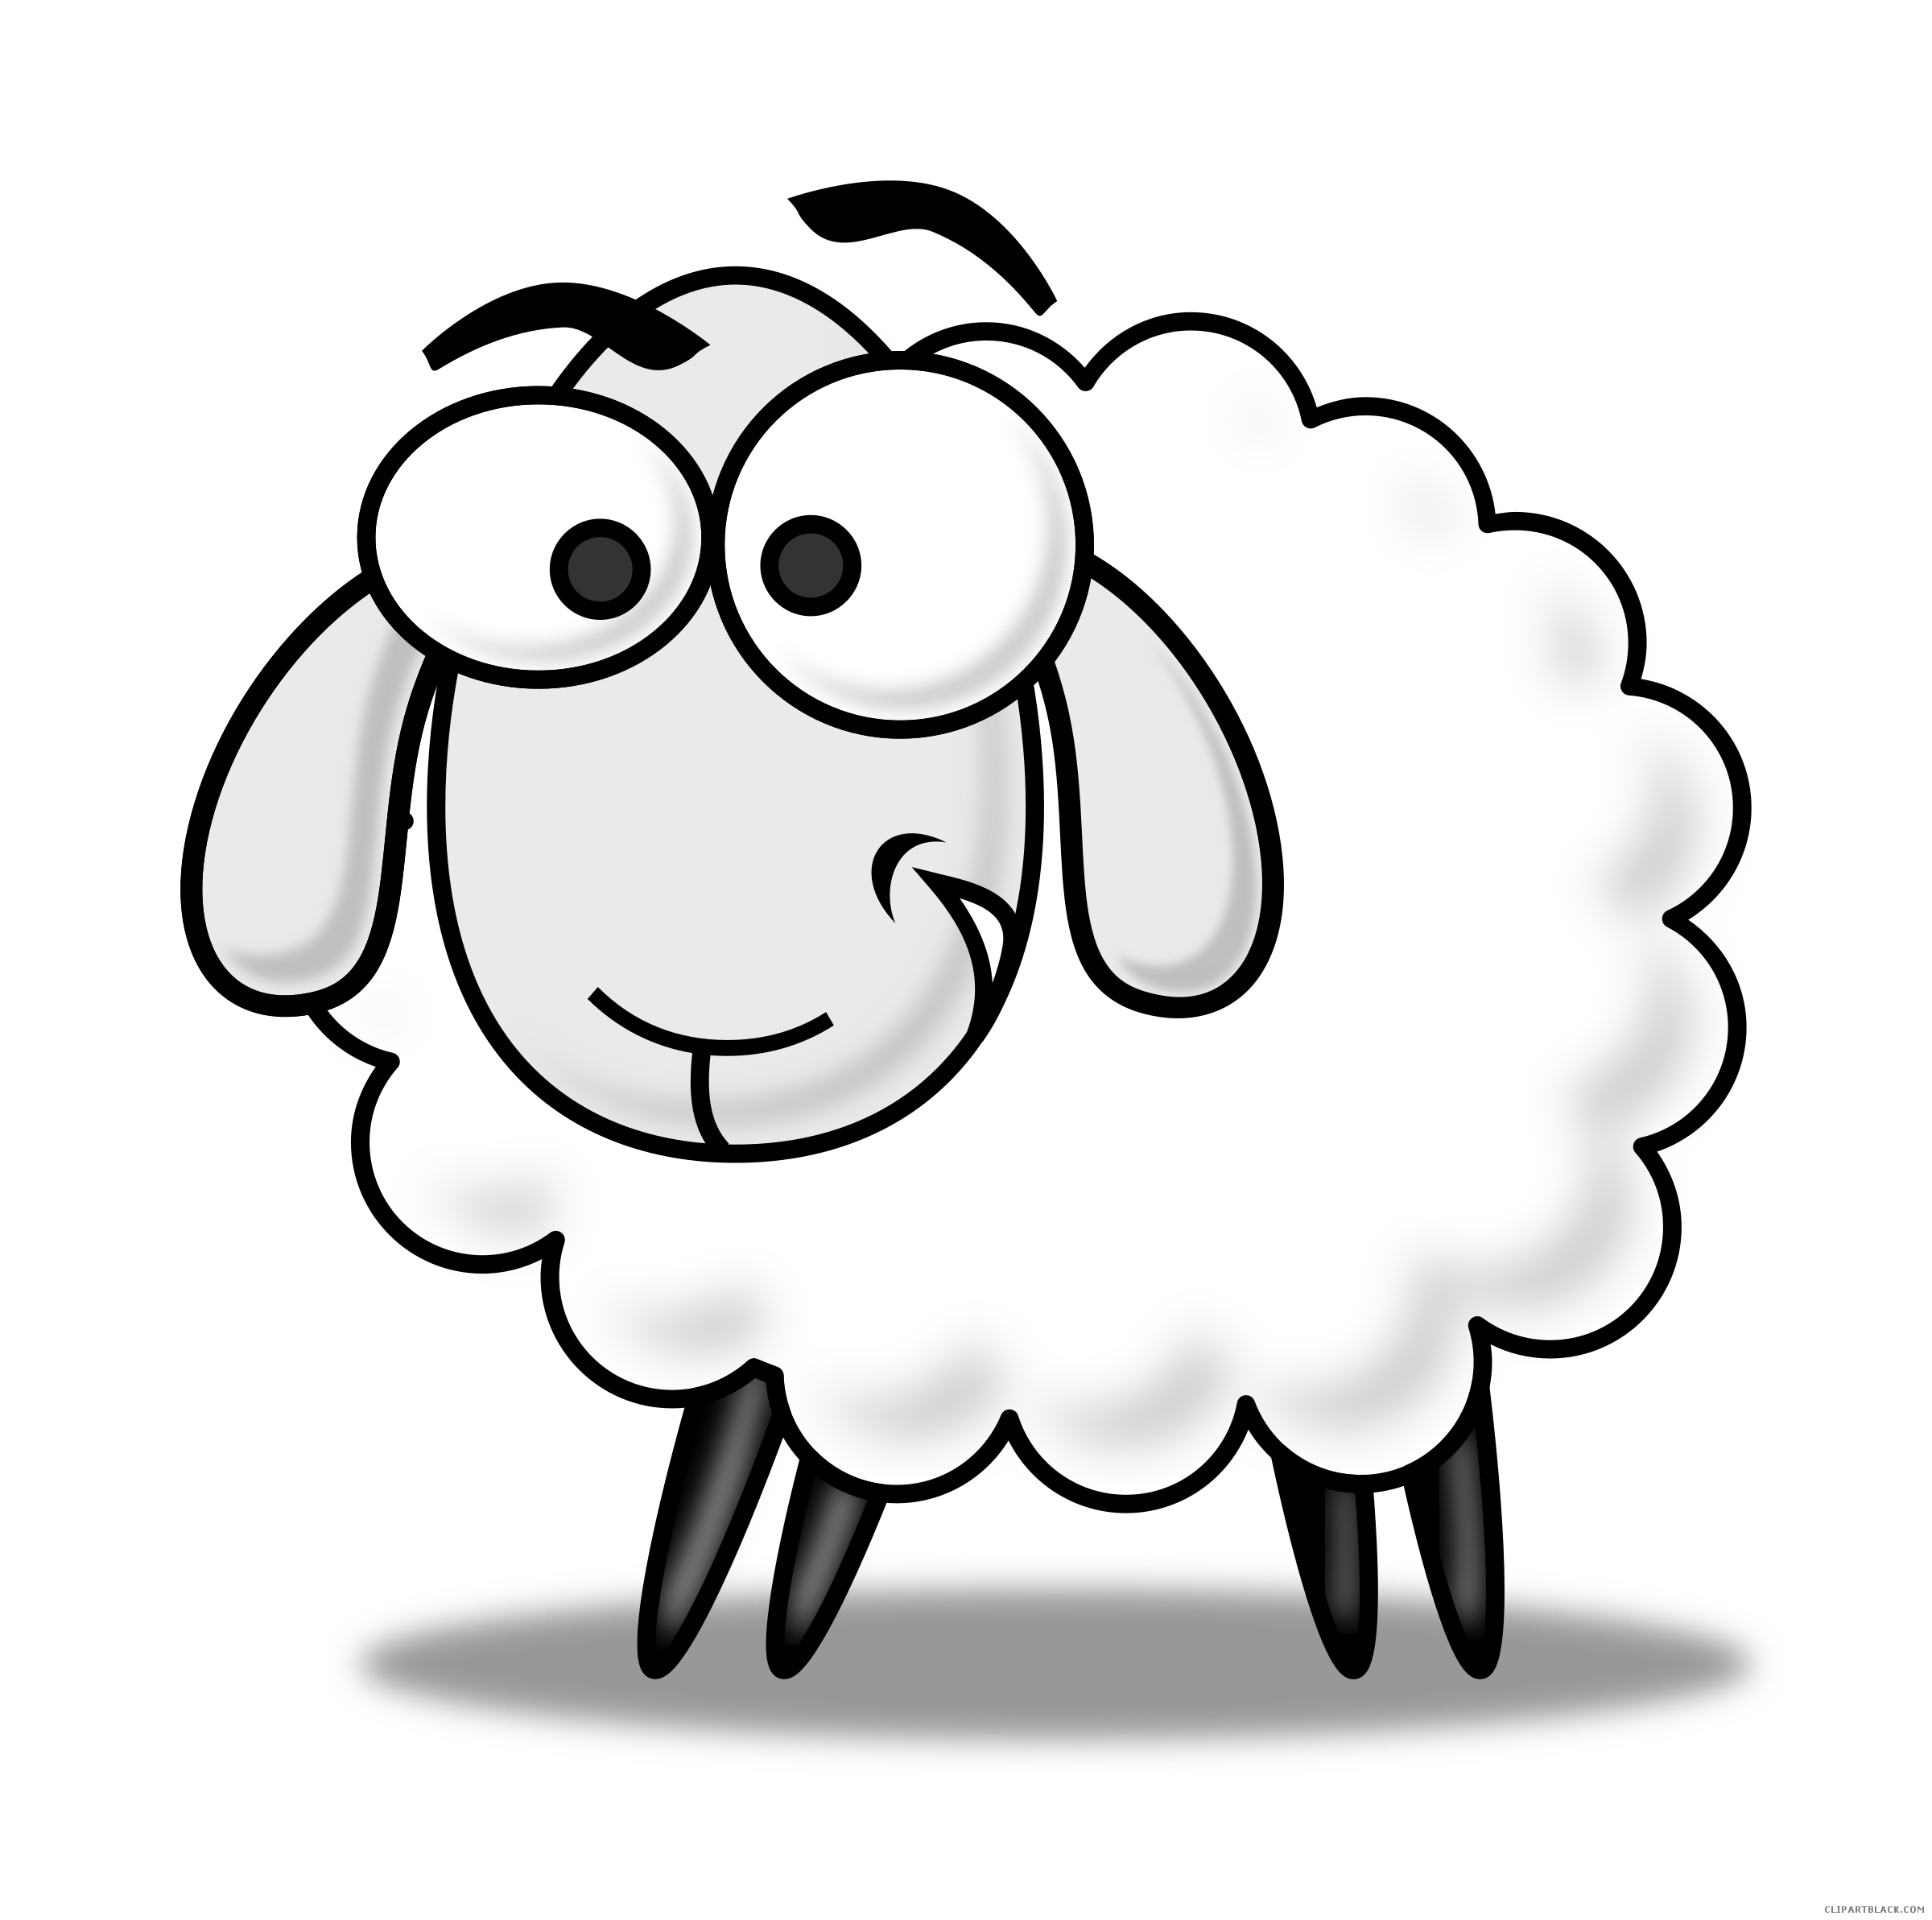 sheep clipart gone astray